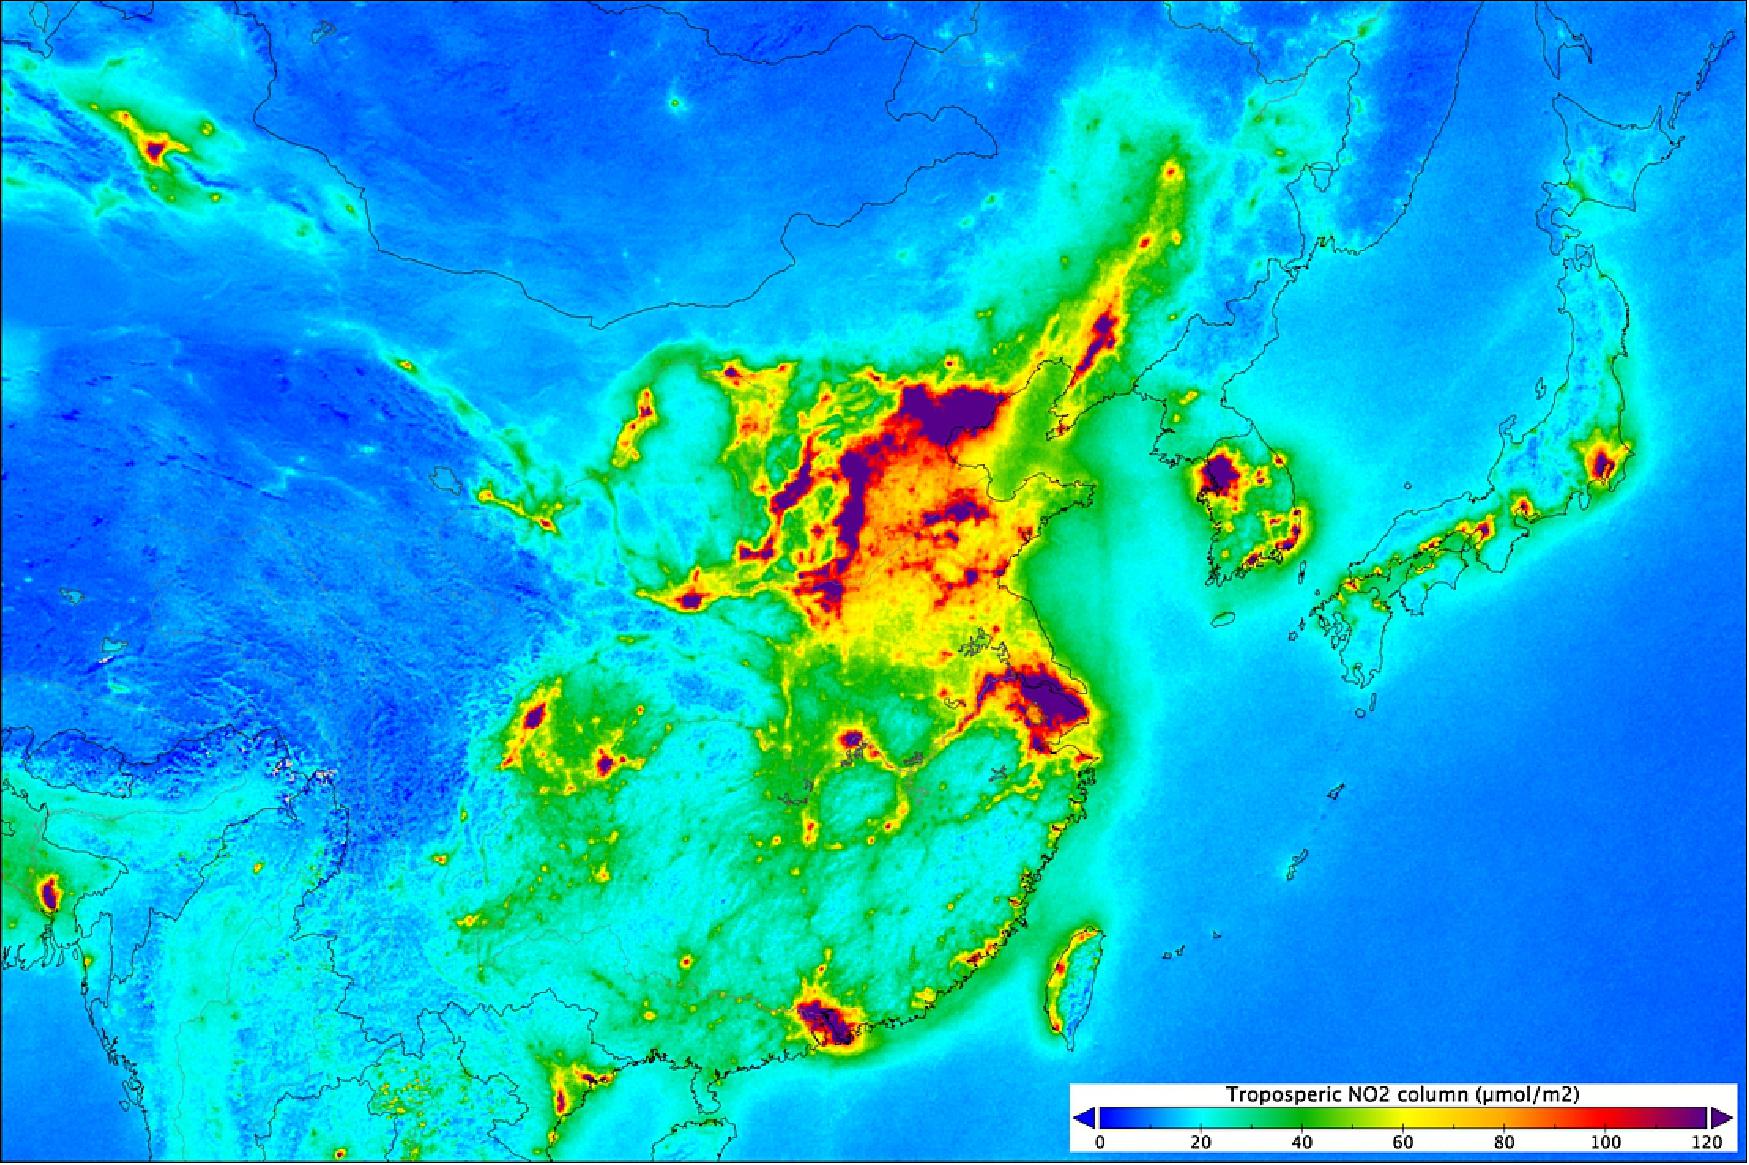 Figure 17: Nitrogen dioxide levels over China and Japan: Based on measurements gathered by the Copernicus Sentinel-5P mission between April and September 2018, the image shows high levels of nitrogen dioxide emissions in China and Japan. Nitrogen dioxide pollutes the air mainly as a result of traffic and the combustion of fossil fuel in industrial processes. It has a significant impact on human health, contributing in particular to respiratory problems (image credit: ESA, the image contains modified Copernicus data (2018), processed by KNMI)